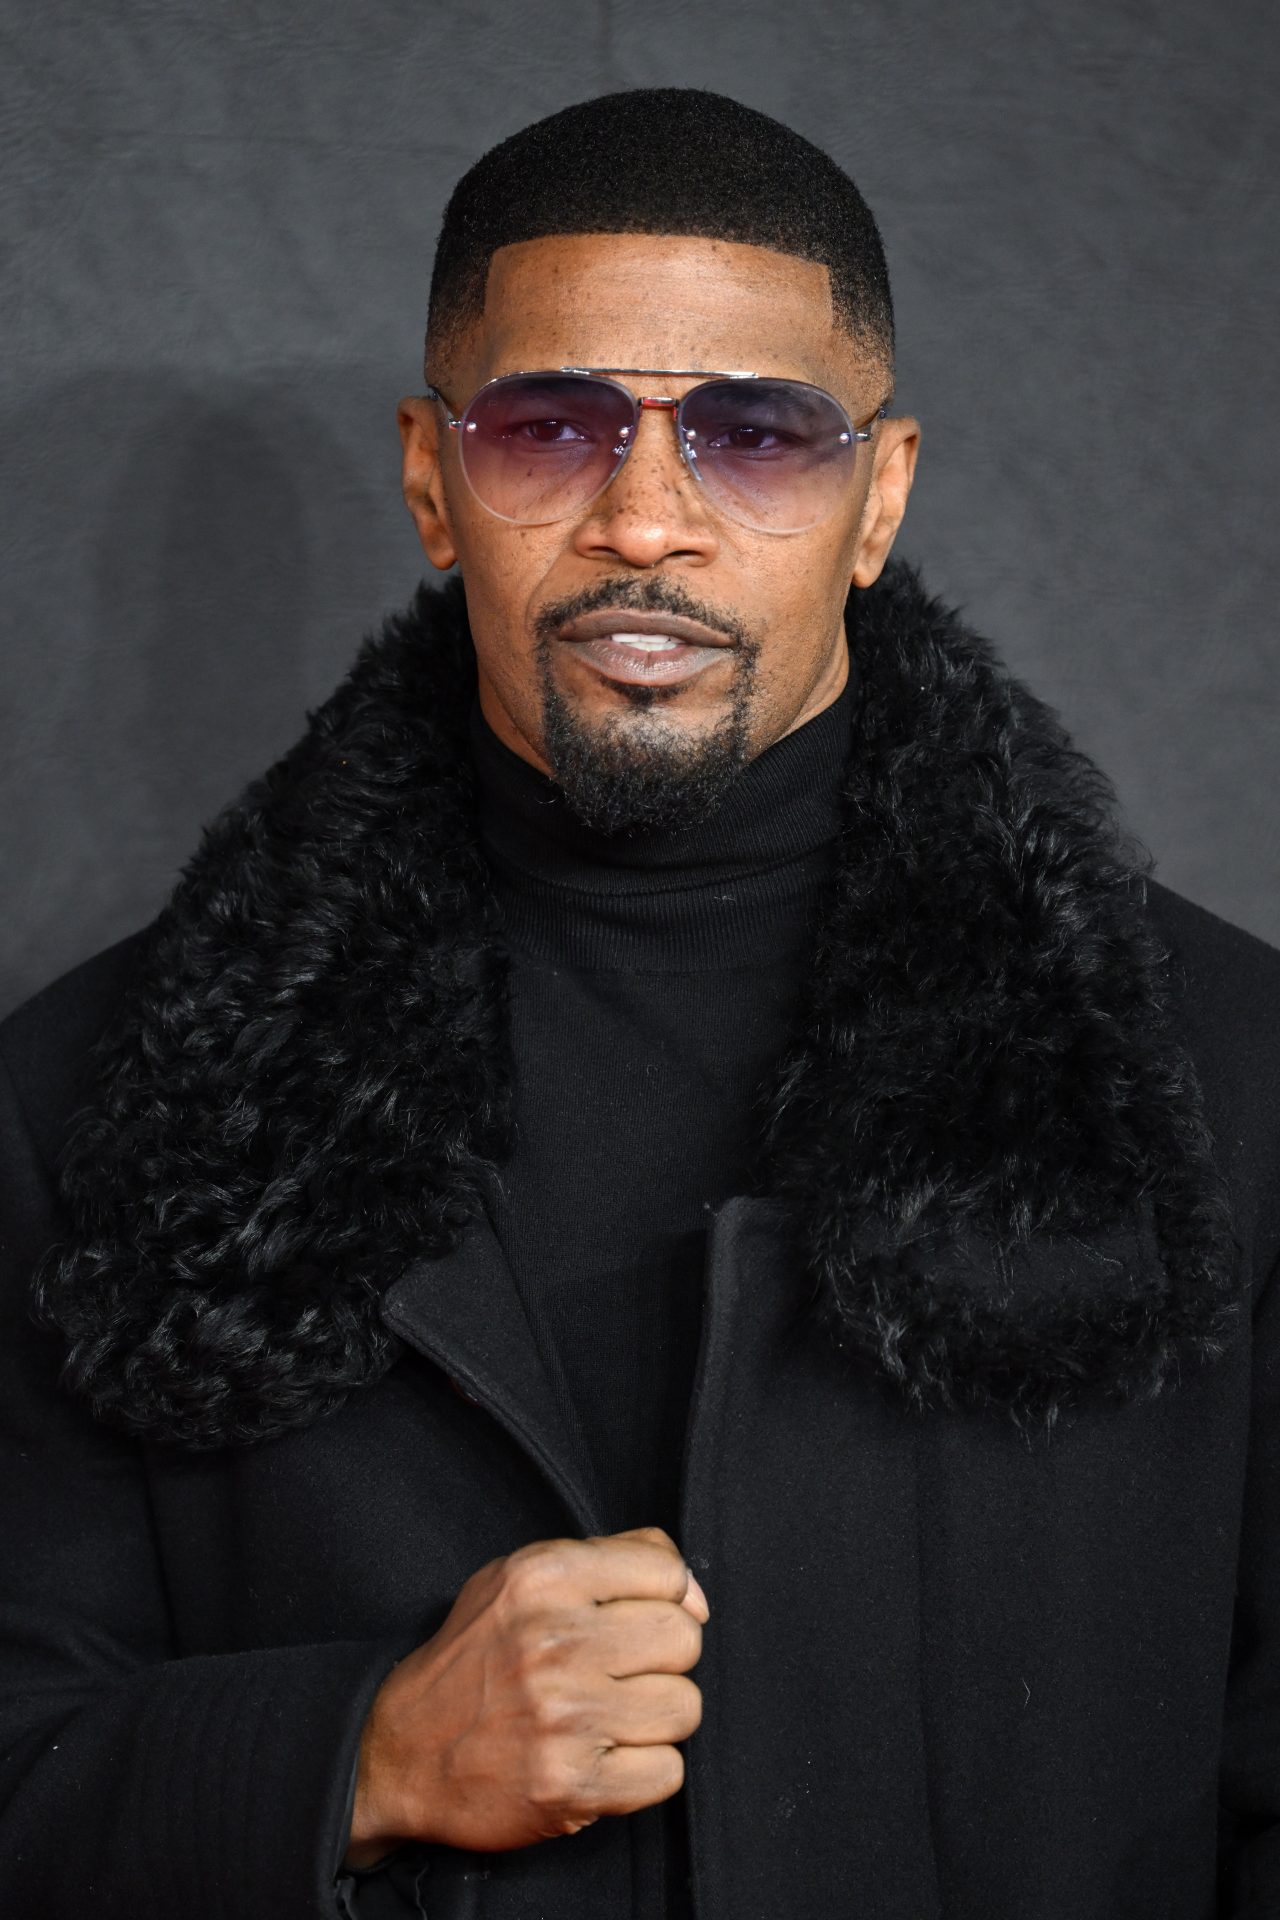 Who is accusing Jamie Foxx?